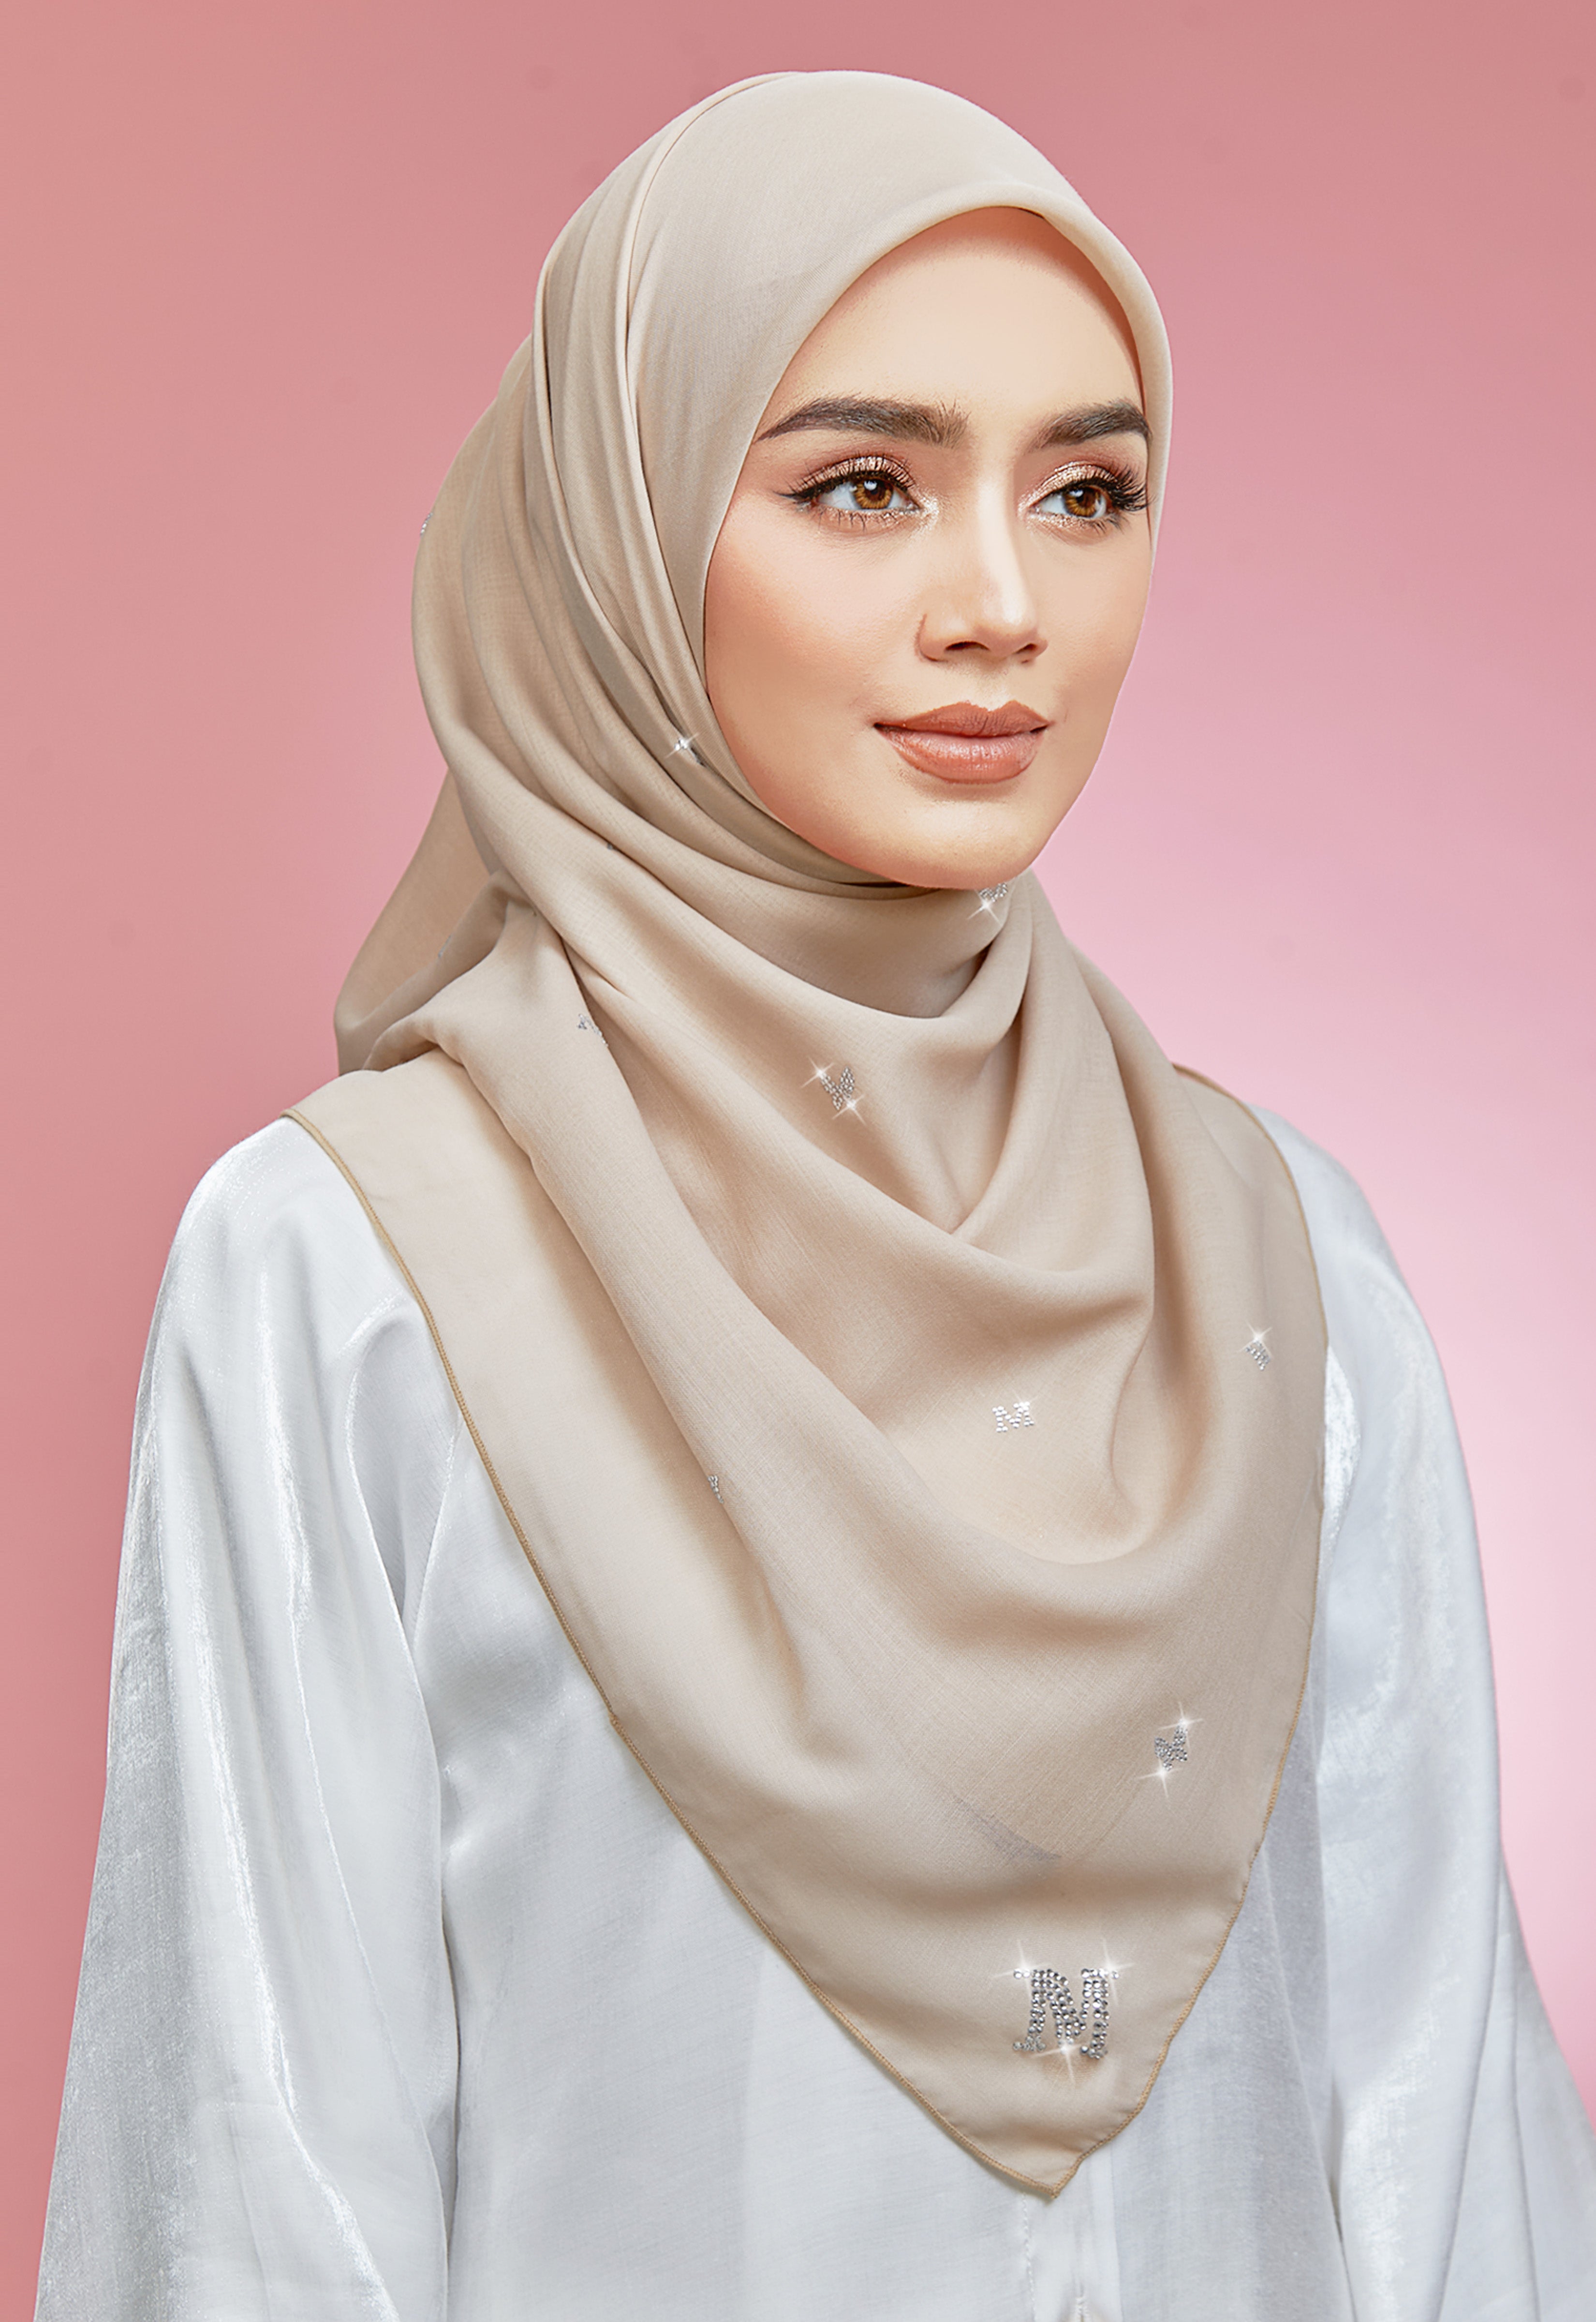 PLAIN BUTTERFLY STONE BAWAL - CHAMPAGNE